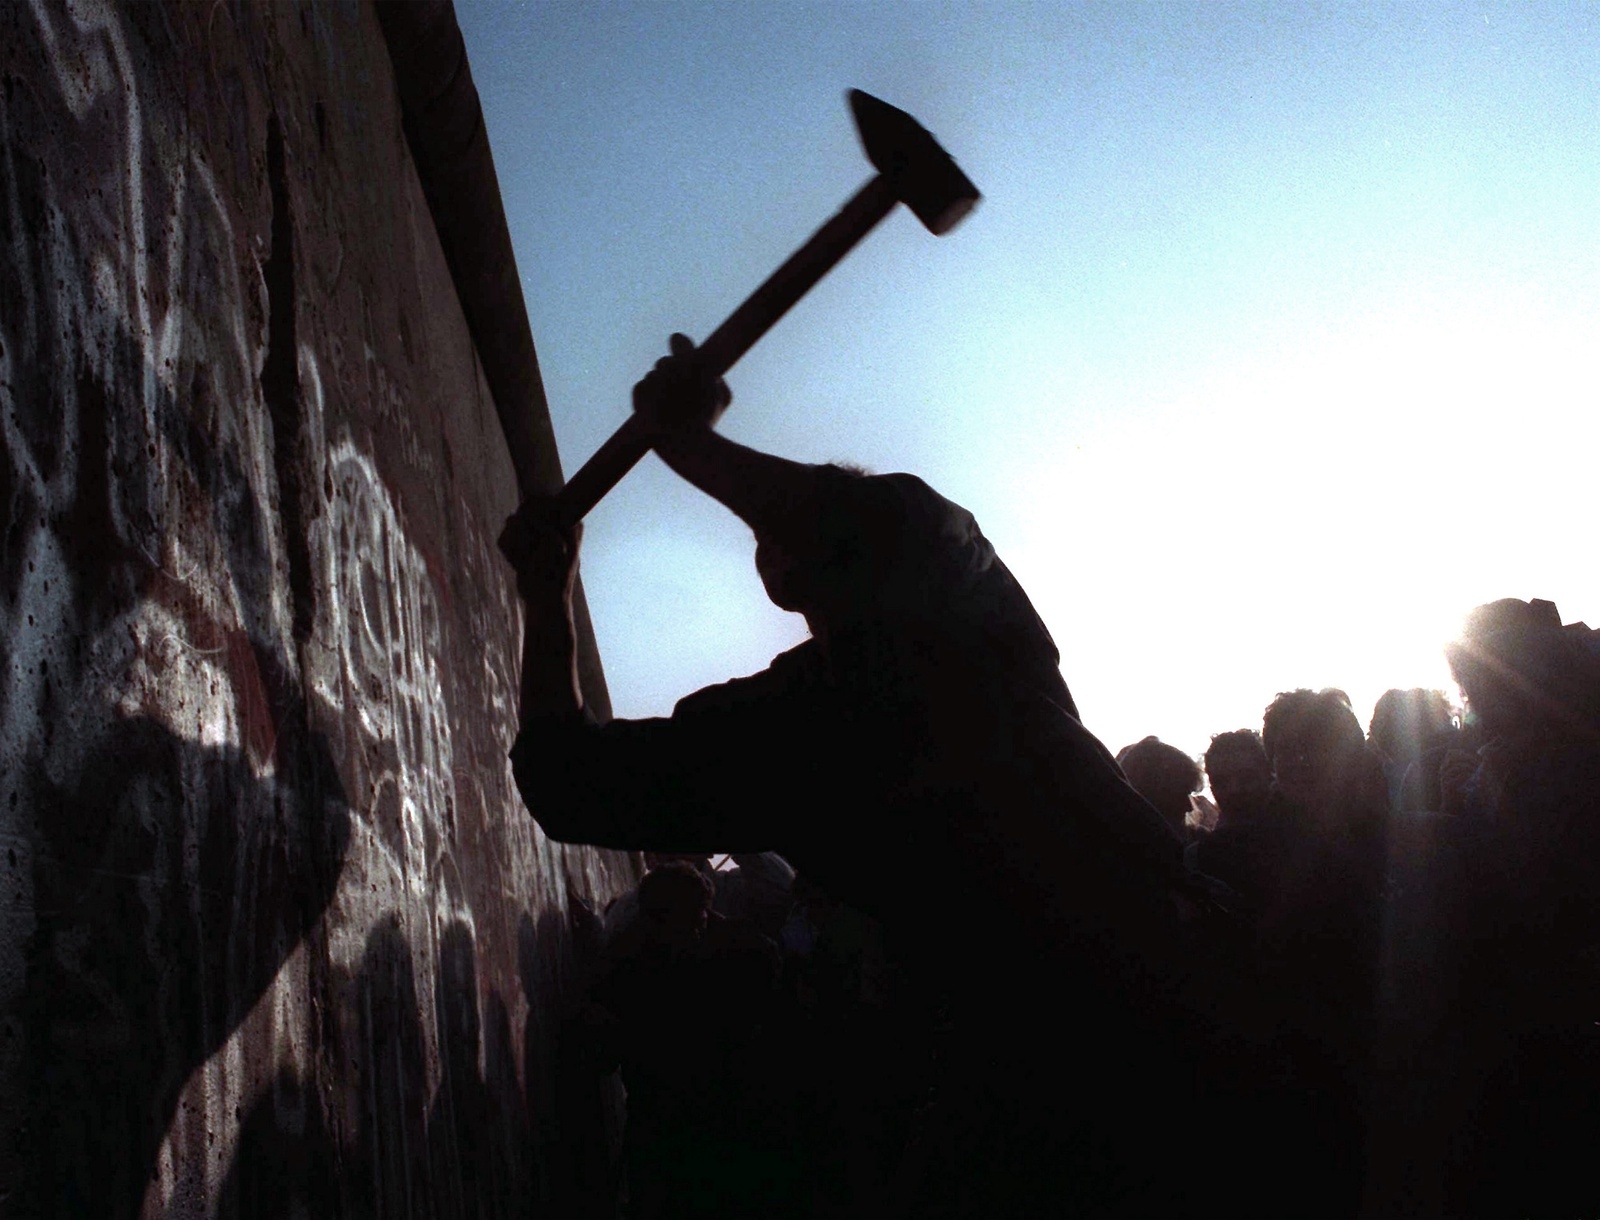 FILE - This Nov. 12, 1989 file photo shows a man hammering at the Berlin Wall, as the border barrier between East and West Germany was torn down after 28 years. Monday, Nov. 9, 2009 marks the 20th anniversary of the fall of the Berlin Wall. (AP Photo/John Gaps III, File)